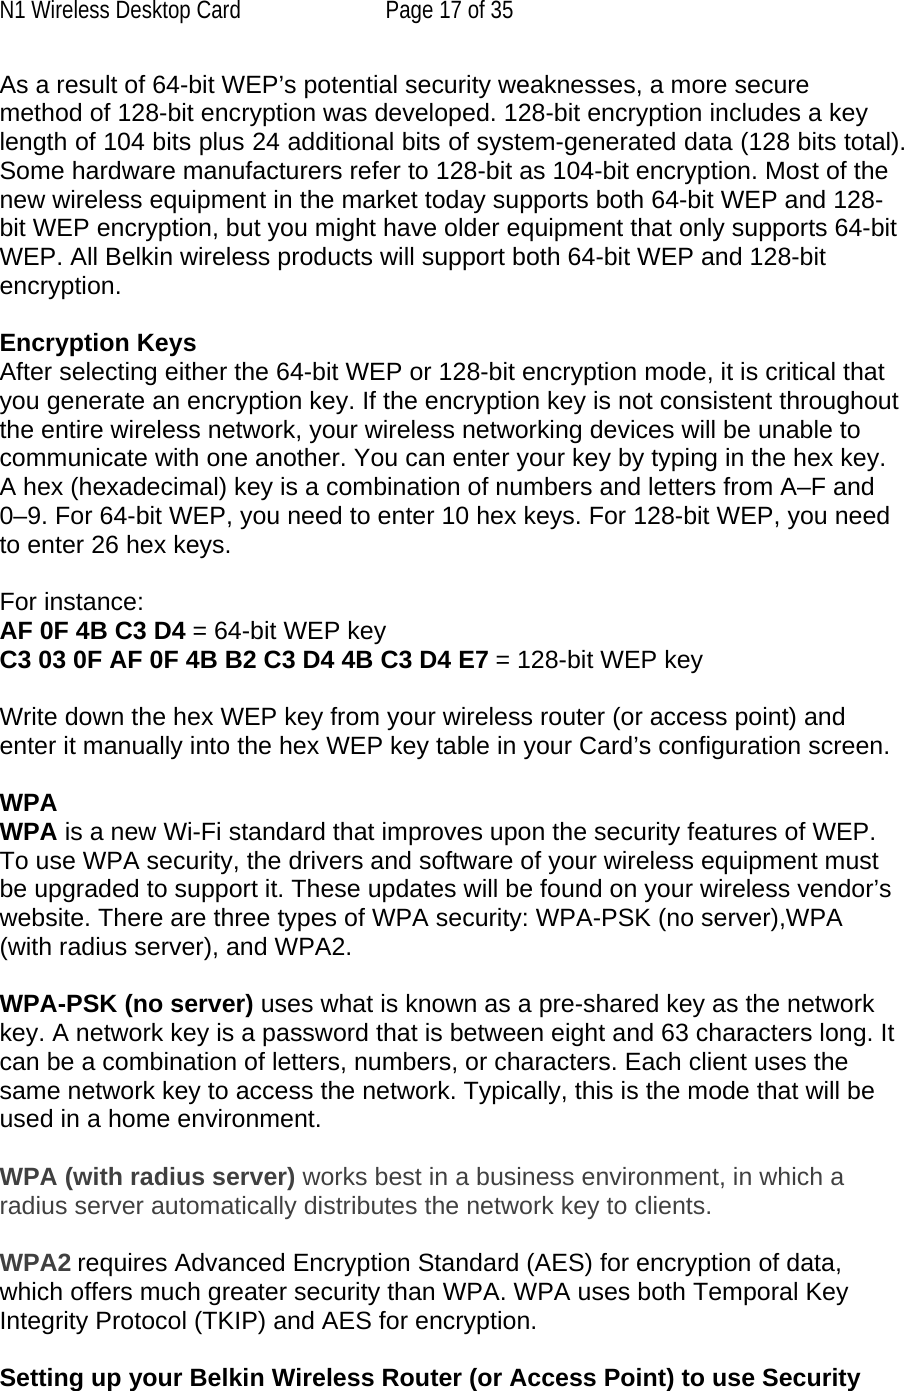 N1 Wireless Desktop Card  Page 17 of 35 As a result of 64-bit WEP’s potential security weaknesses, a more secure method of 128-bit encryption was developed. 128-bit encryption includes a key length of 104 bits plus 24 additional bits of system-generated data (128 bits total). Some hardware manufacturers refer to 128-bit as 104-bit encryption. Most of the new wireless equipment in the market today supports both 64-bit WEP and 128-bit WEP encryption, but you might have older equipment that only supports 64-bit WEP. All Belkin wireless products will support both 64-bit WEP and 128-bit encryption.   Encryption Keys  After selecting either the 64-bit WEP or 128-bit encryption mode, it is critical that you generate an encryption key. If the encryption key is not consistent throughout the entire wireless network, your wireless networking devices will be unable to communicate with one another. You can enter your key by typing in the hex key. A hex (hexadecimal) key is a combination of numbers and letters from A–F and 0–9. For 64-bit WEP, you need to enter 10 hex keys. For 128-bit WEP, you need to enter 26 hex keys.   For instance:  AF 0F 4B C3 D4 = 64-bit WEP key  C3 03 0F AF 0F 4B B2 C3 D4 4B C3 D4 E7 = 128-bit WEP key   Write down the hex WEP key from your wireless router (or access point) and enter it manually into the hex WEP key table in your Card’s configuration screen.  WPA  WPA is a new Wi-Fi standard that improves upon the security features of WEP. To use WPA security, the drivers and software of your wireless equipment must be upgraded to support it. These updates will be found on your wireless vendor’s website. There are three types of WPA security: WPA-PSK (no server),WPA (with radius server), and WPA2.  WPA-PSK (no server) uses what is known as a pre-shared key as the network key. A network key is a password that is between eight and 63 characters long. It can be a combination of letters, numbers, or characters. Each client uses the same network key to access the network. Typically, this is the mode that will be used in a home environment.   WPA (with radius server) works best in a business environment, in which a radius server automatically distributes the network key to clients.   WPA2 requires Advanced Encryption Standard (AES) for encryption of data, which offers much greater security than WPA. WPA uses both Temporal Key Integrity Protocol (TKIP) and AES for encryption.  Setting up your Belkin Wireless Router (or Access Point) to use Security 